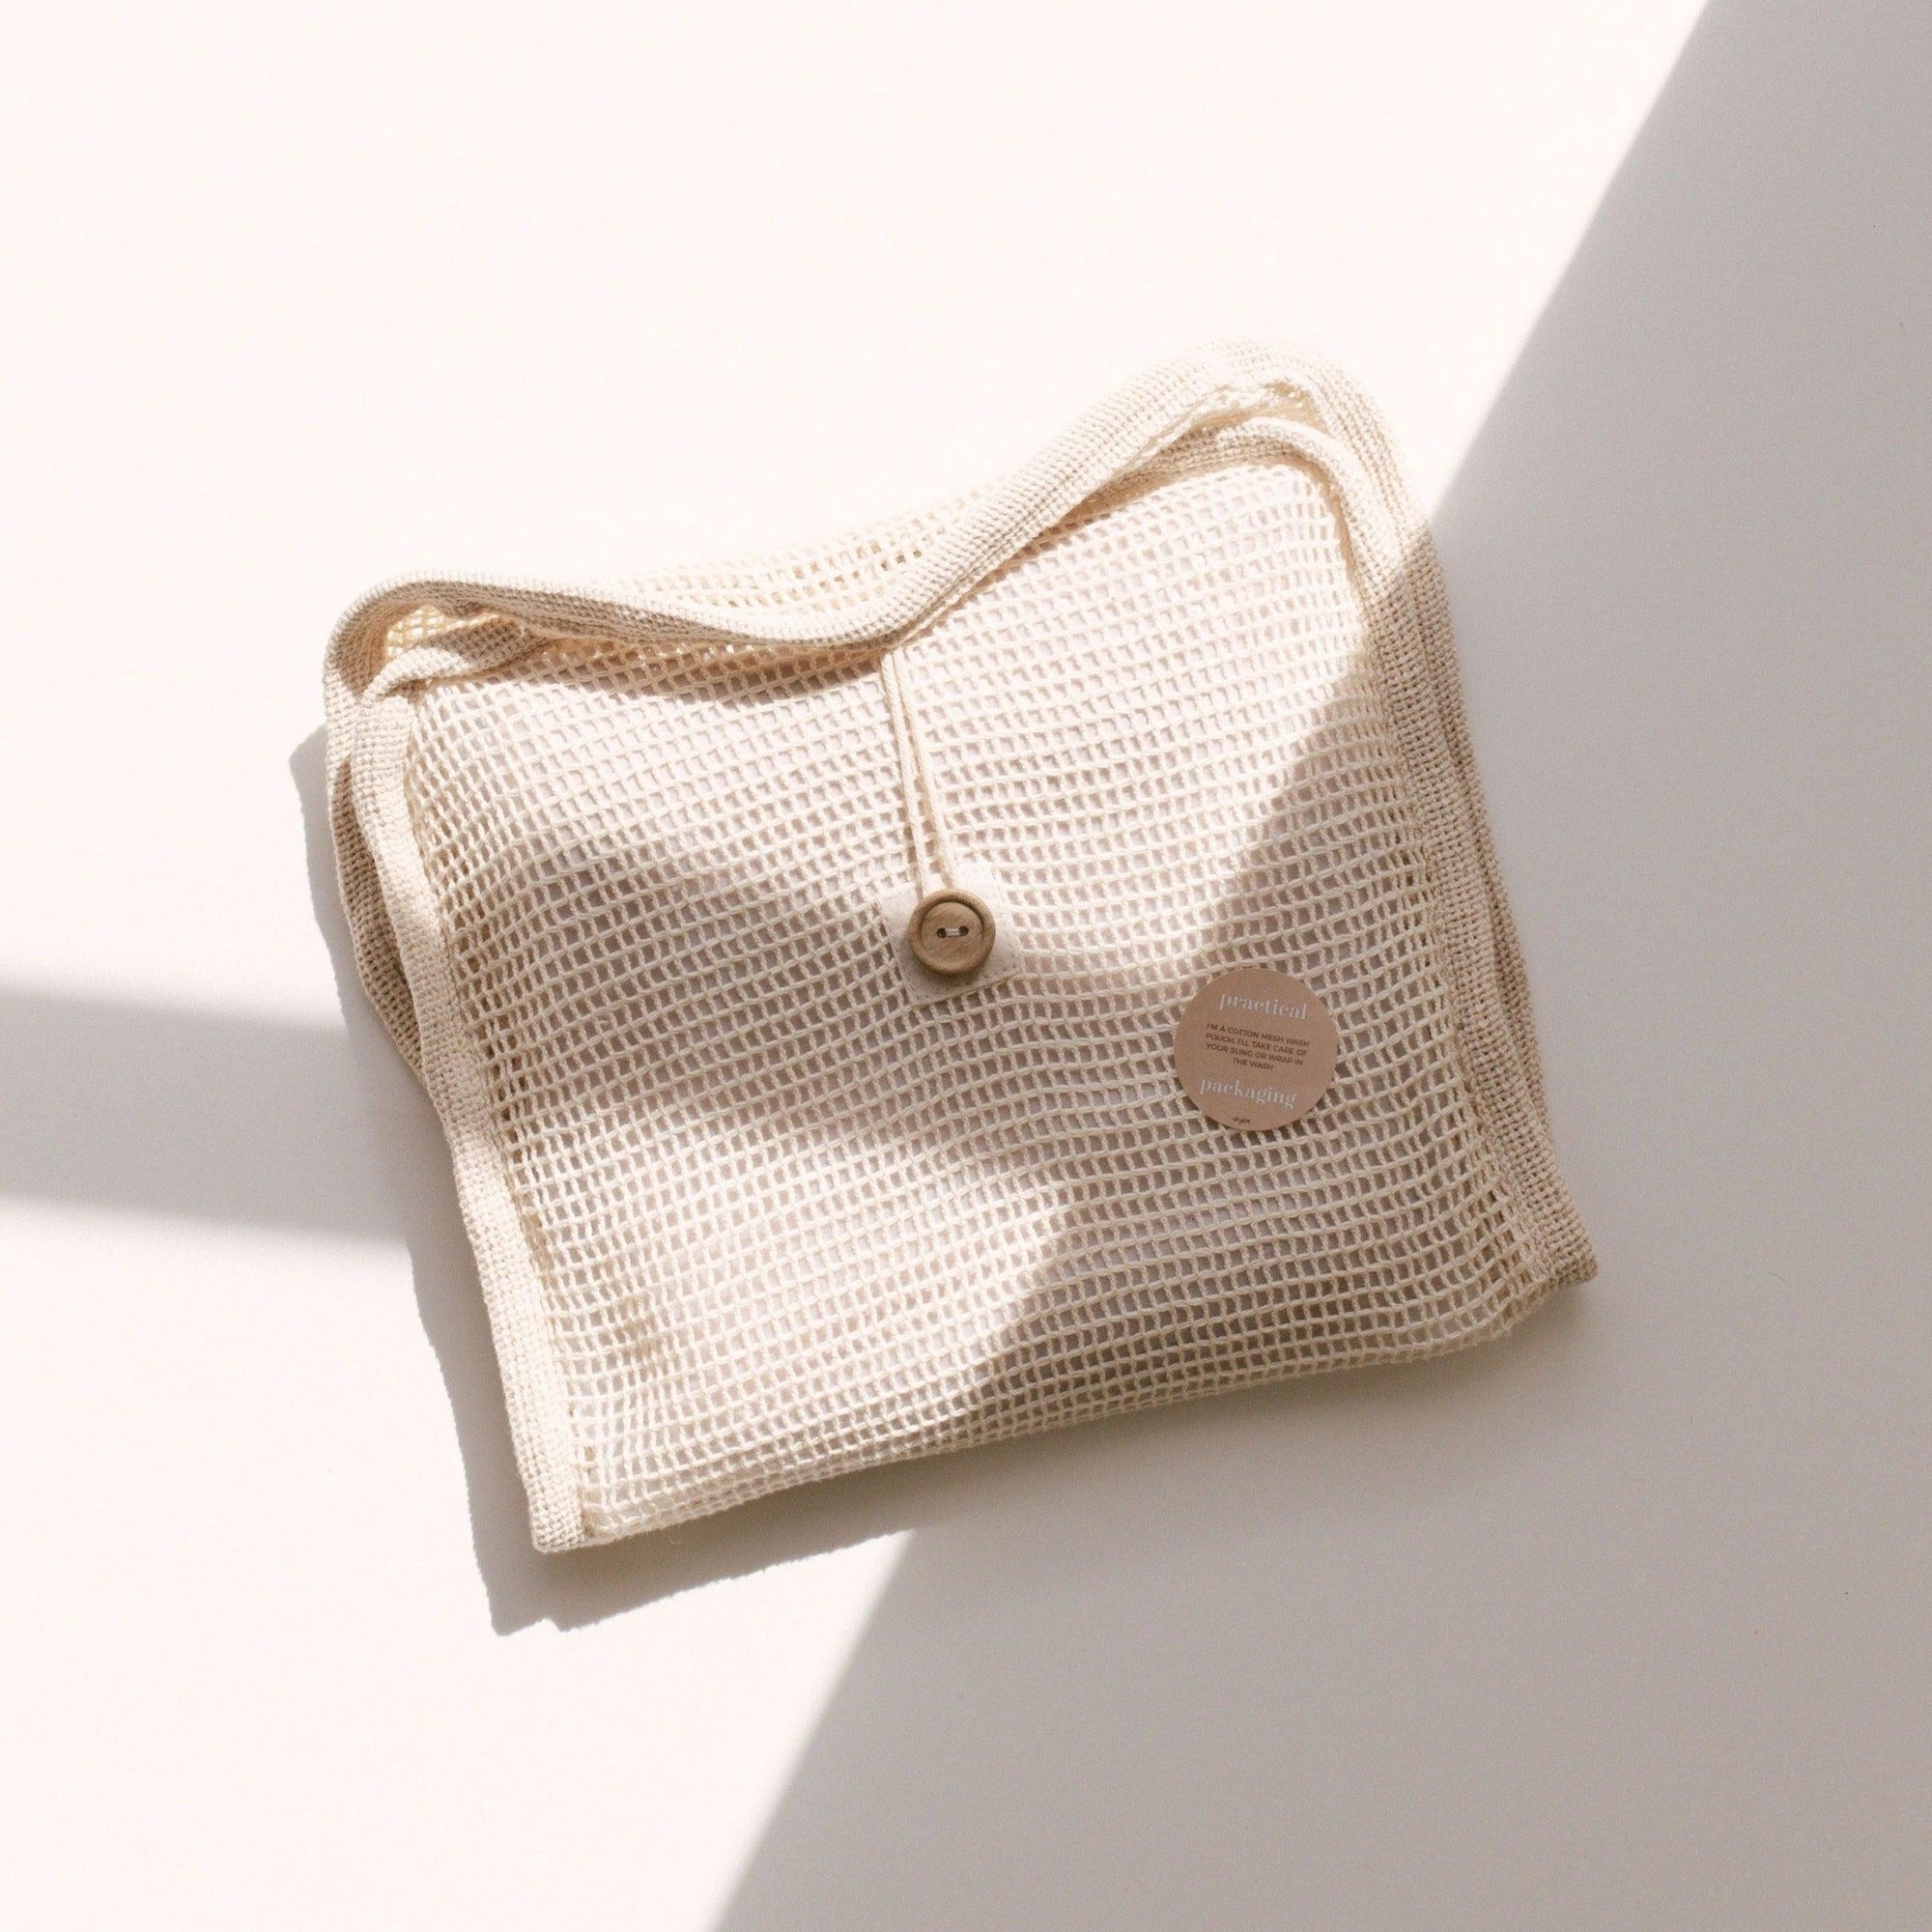 A beige bag by Chekoh sitting on a white surface.